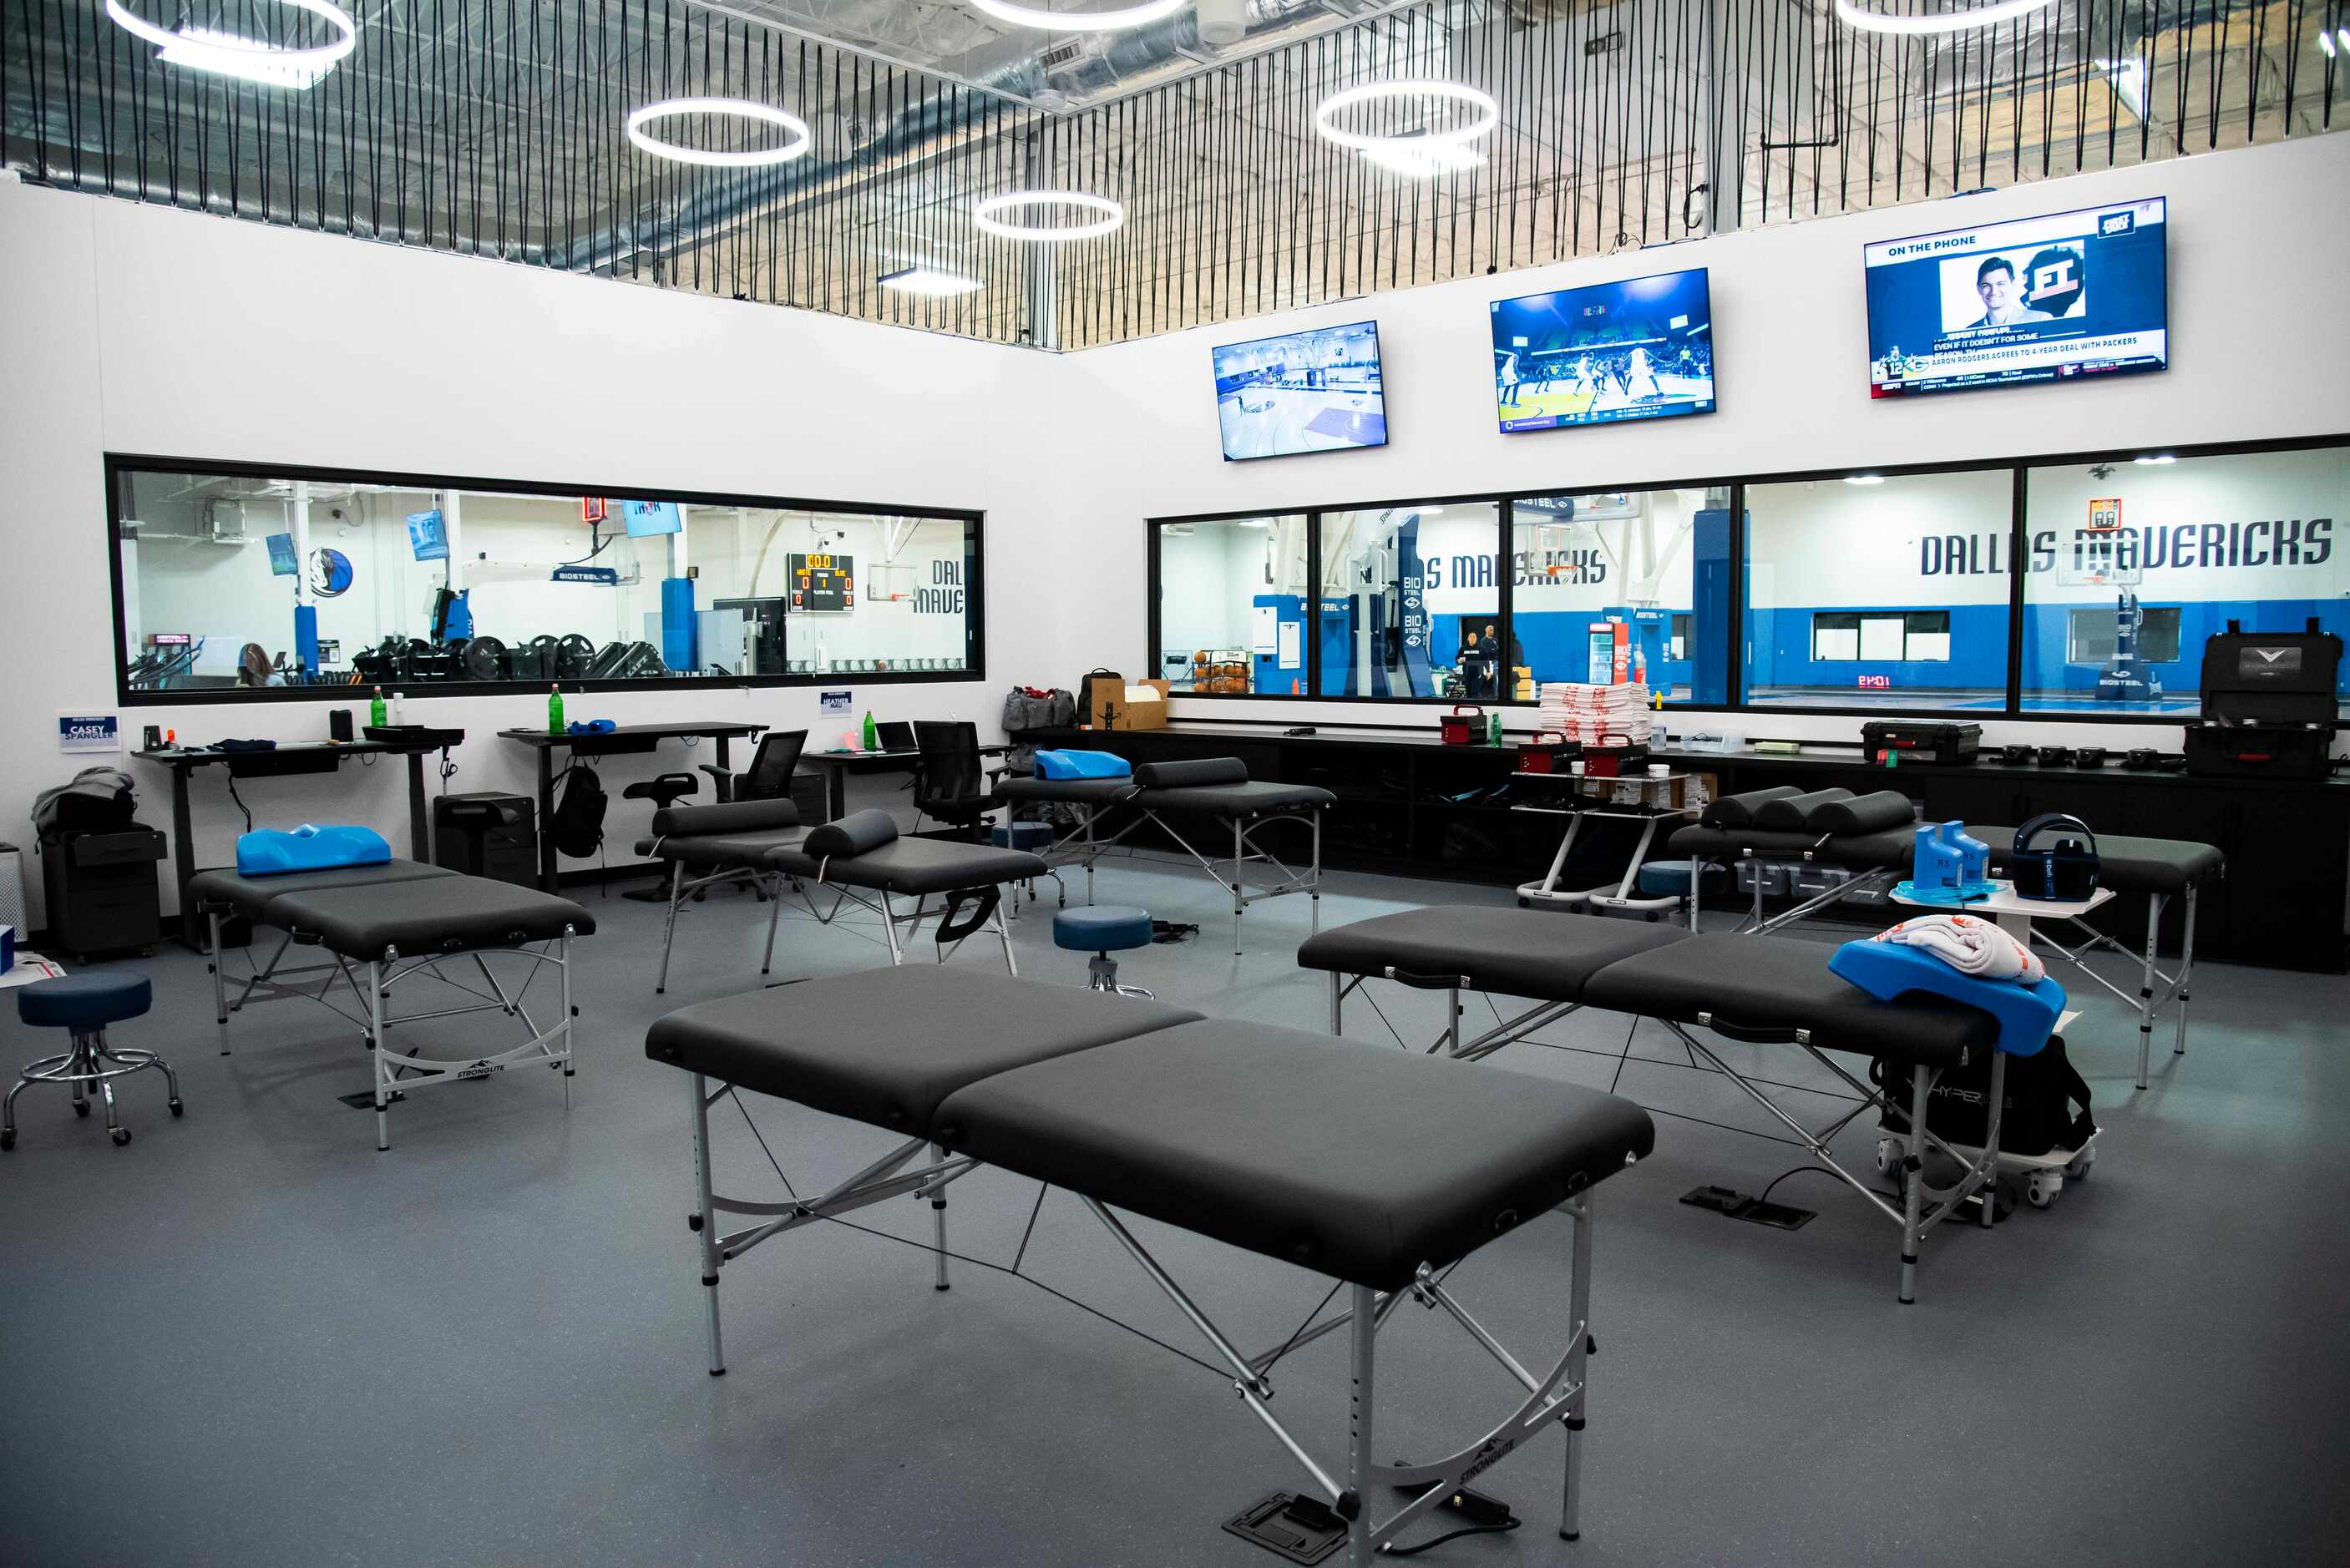 A view of the new training room at the Dallas Mavericks BioSteel Practice Center in downtown...